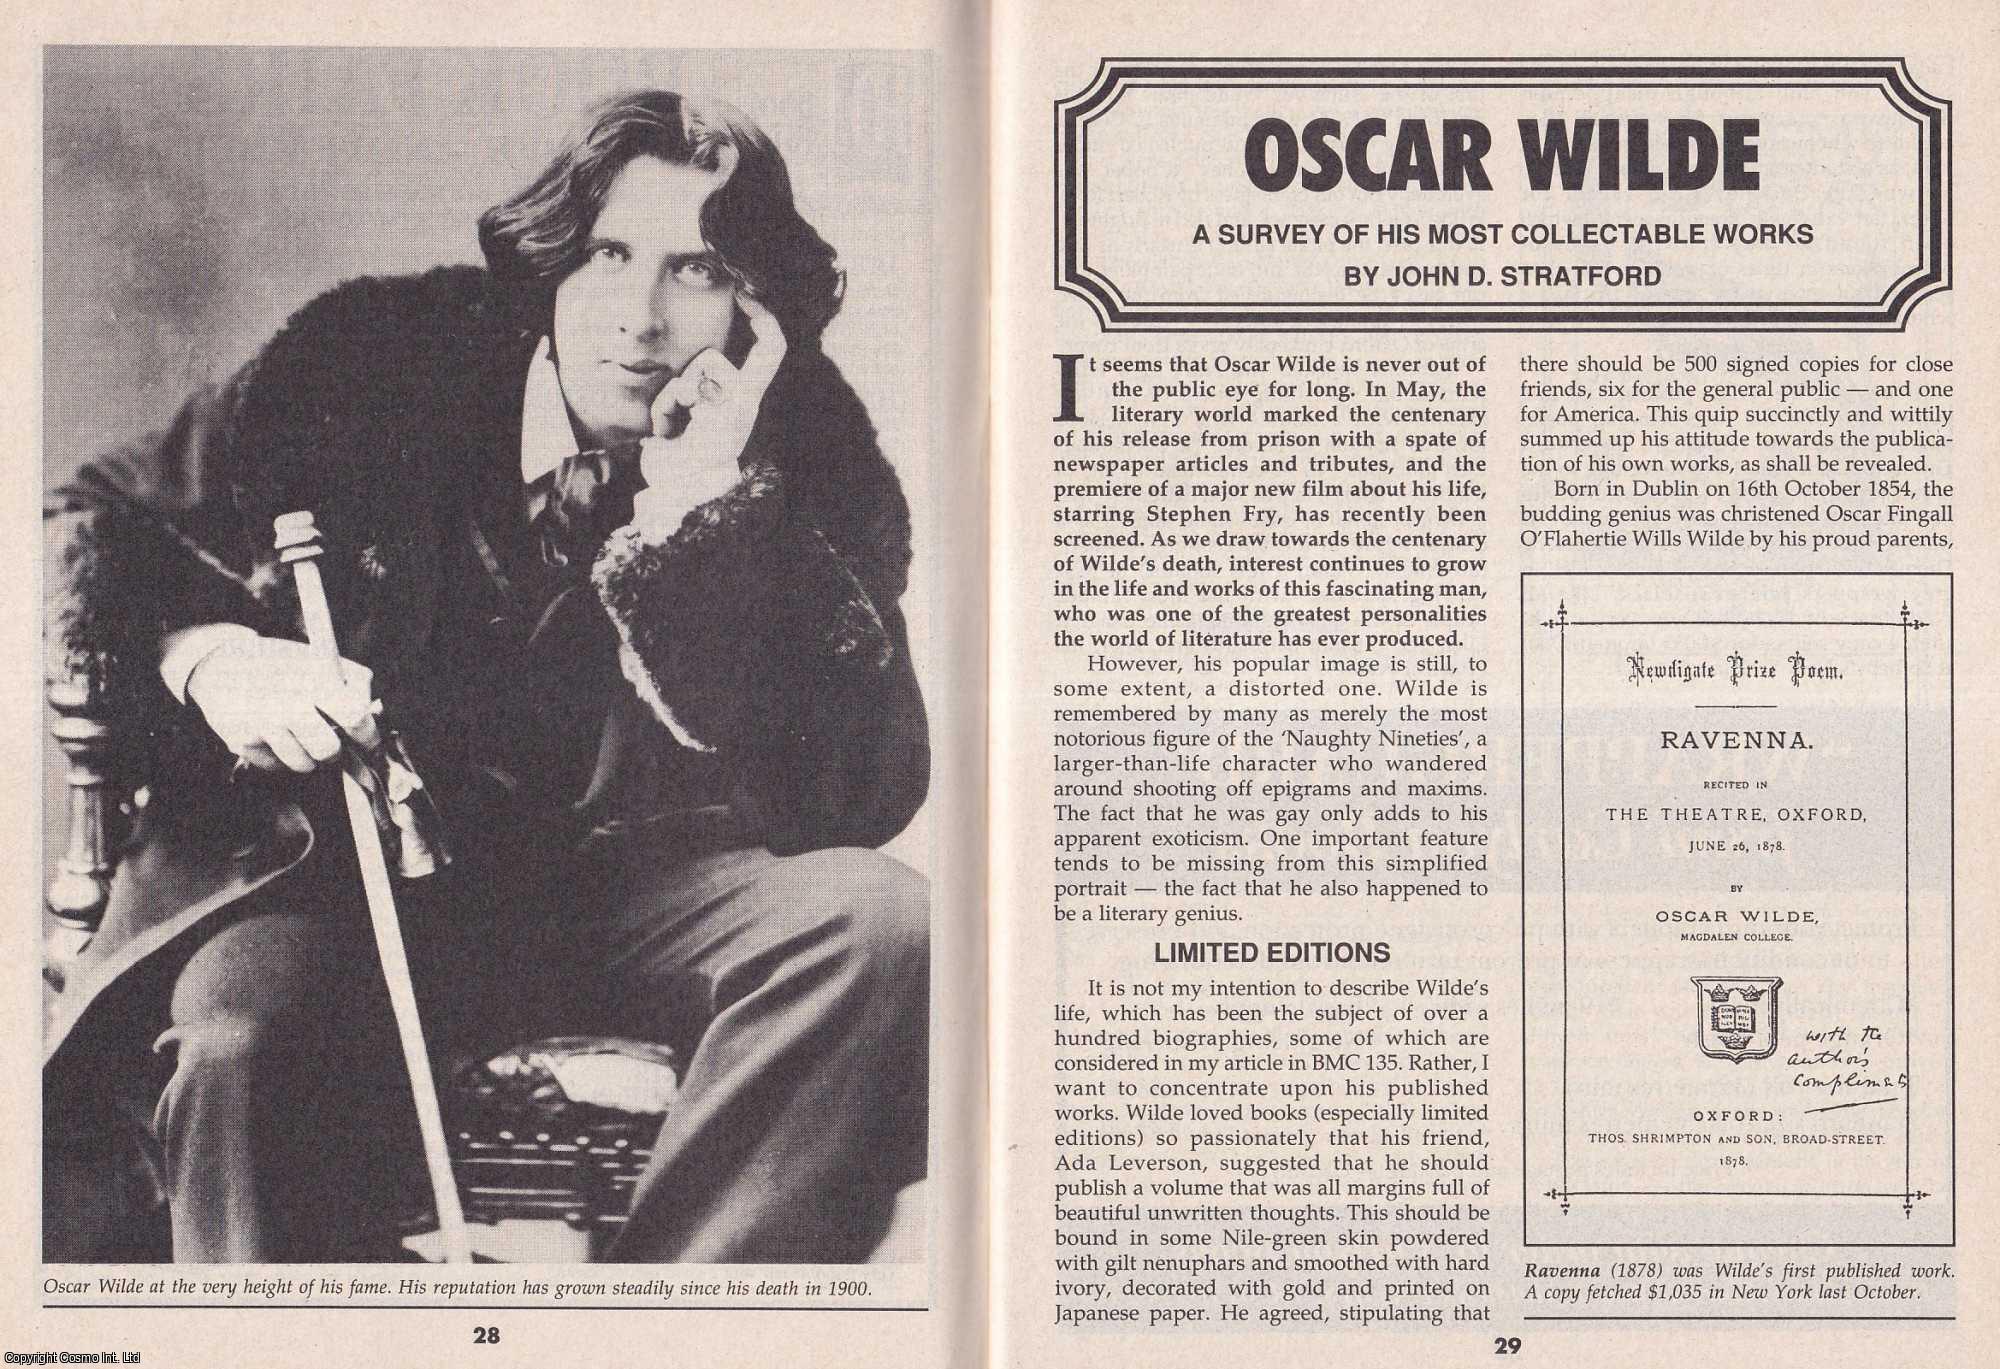 John D. Stratford - Oscar Wilde. A Survey of His Most Collectable Works. This is an original article separated from an issue of The Book & Magazine Collector publication.